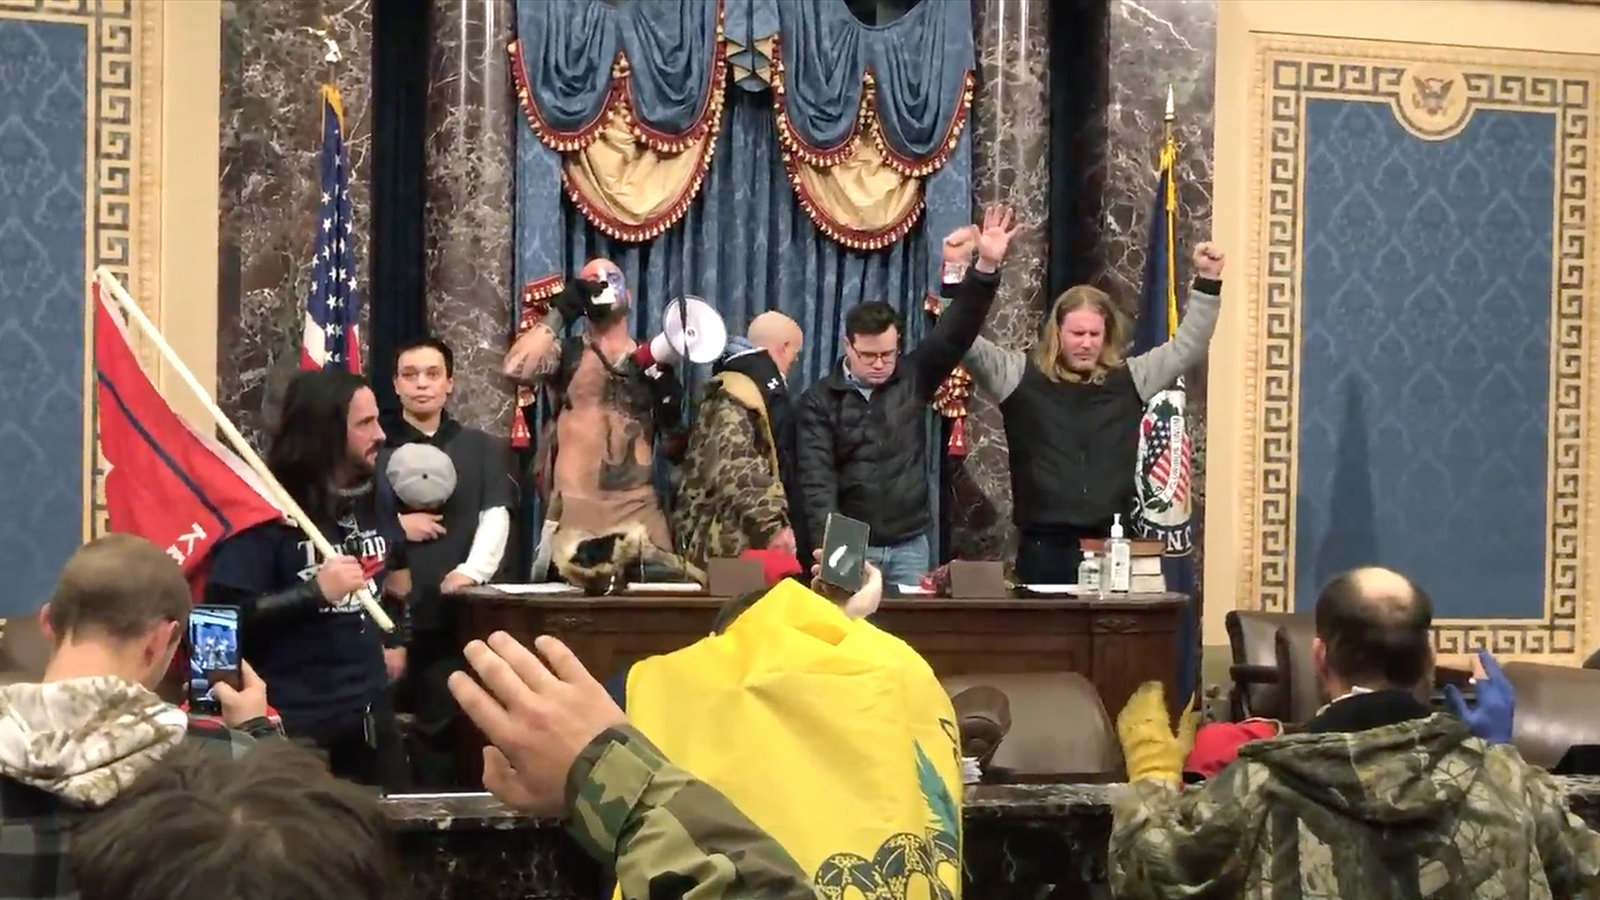 A group of insurrectionists prays inside the U.S. Senate chamber after breaching the Capitol, Jan. 6, 2021, in Washington. Video screen grab via Luke Mogelson/The New Yorker